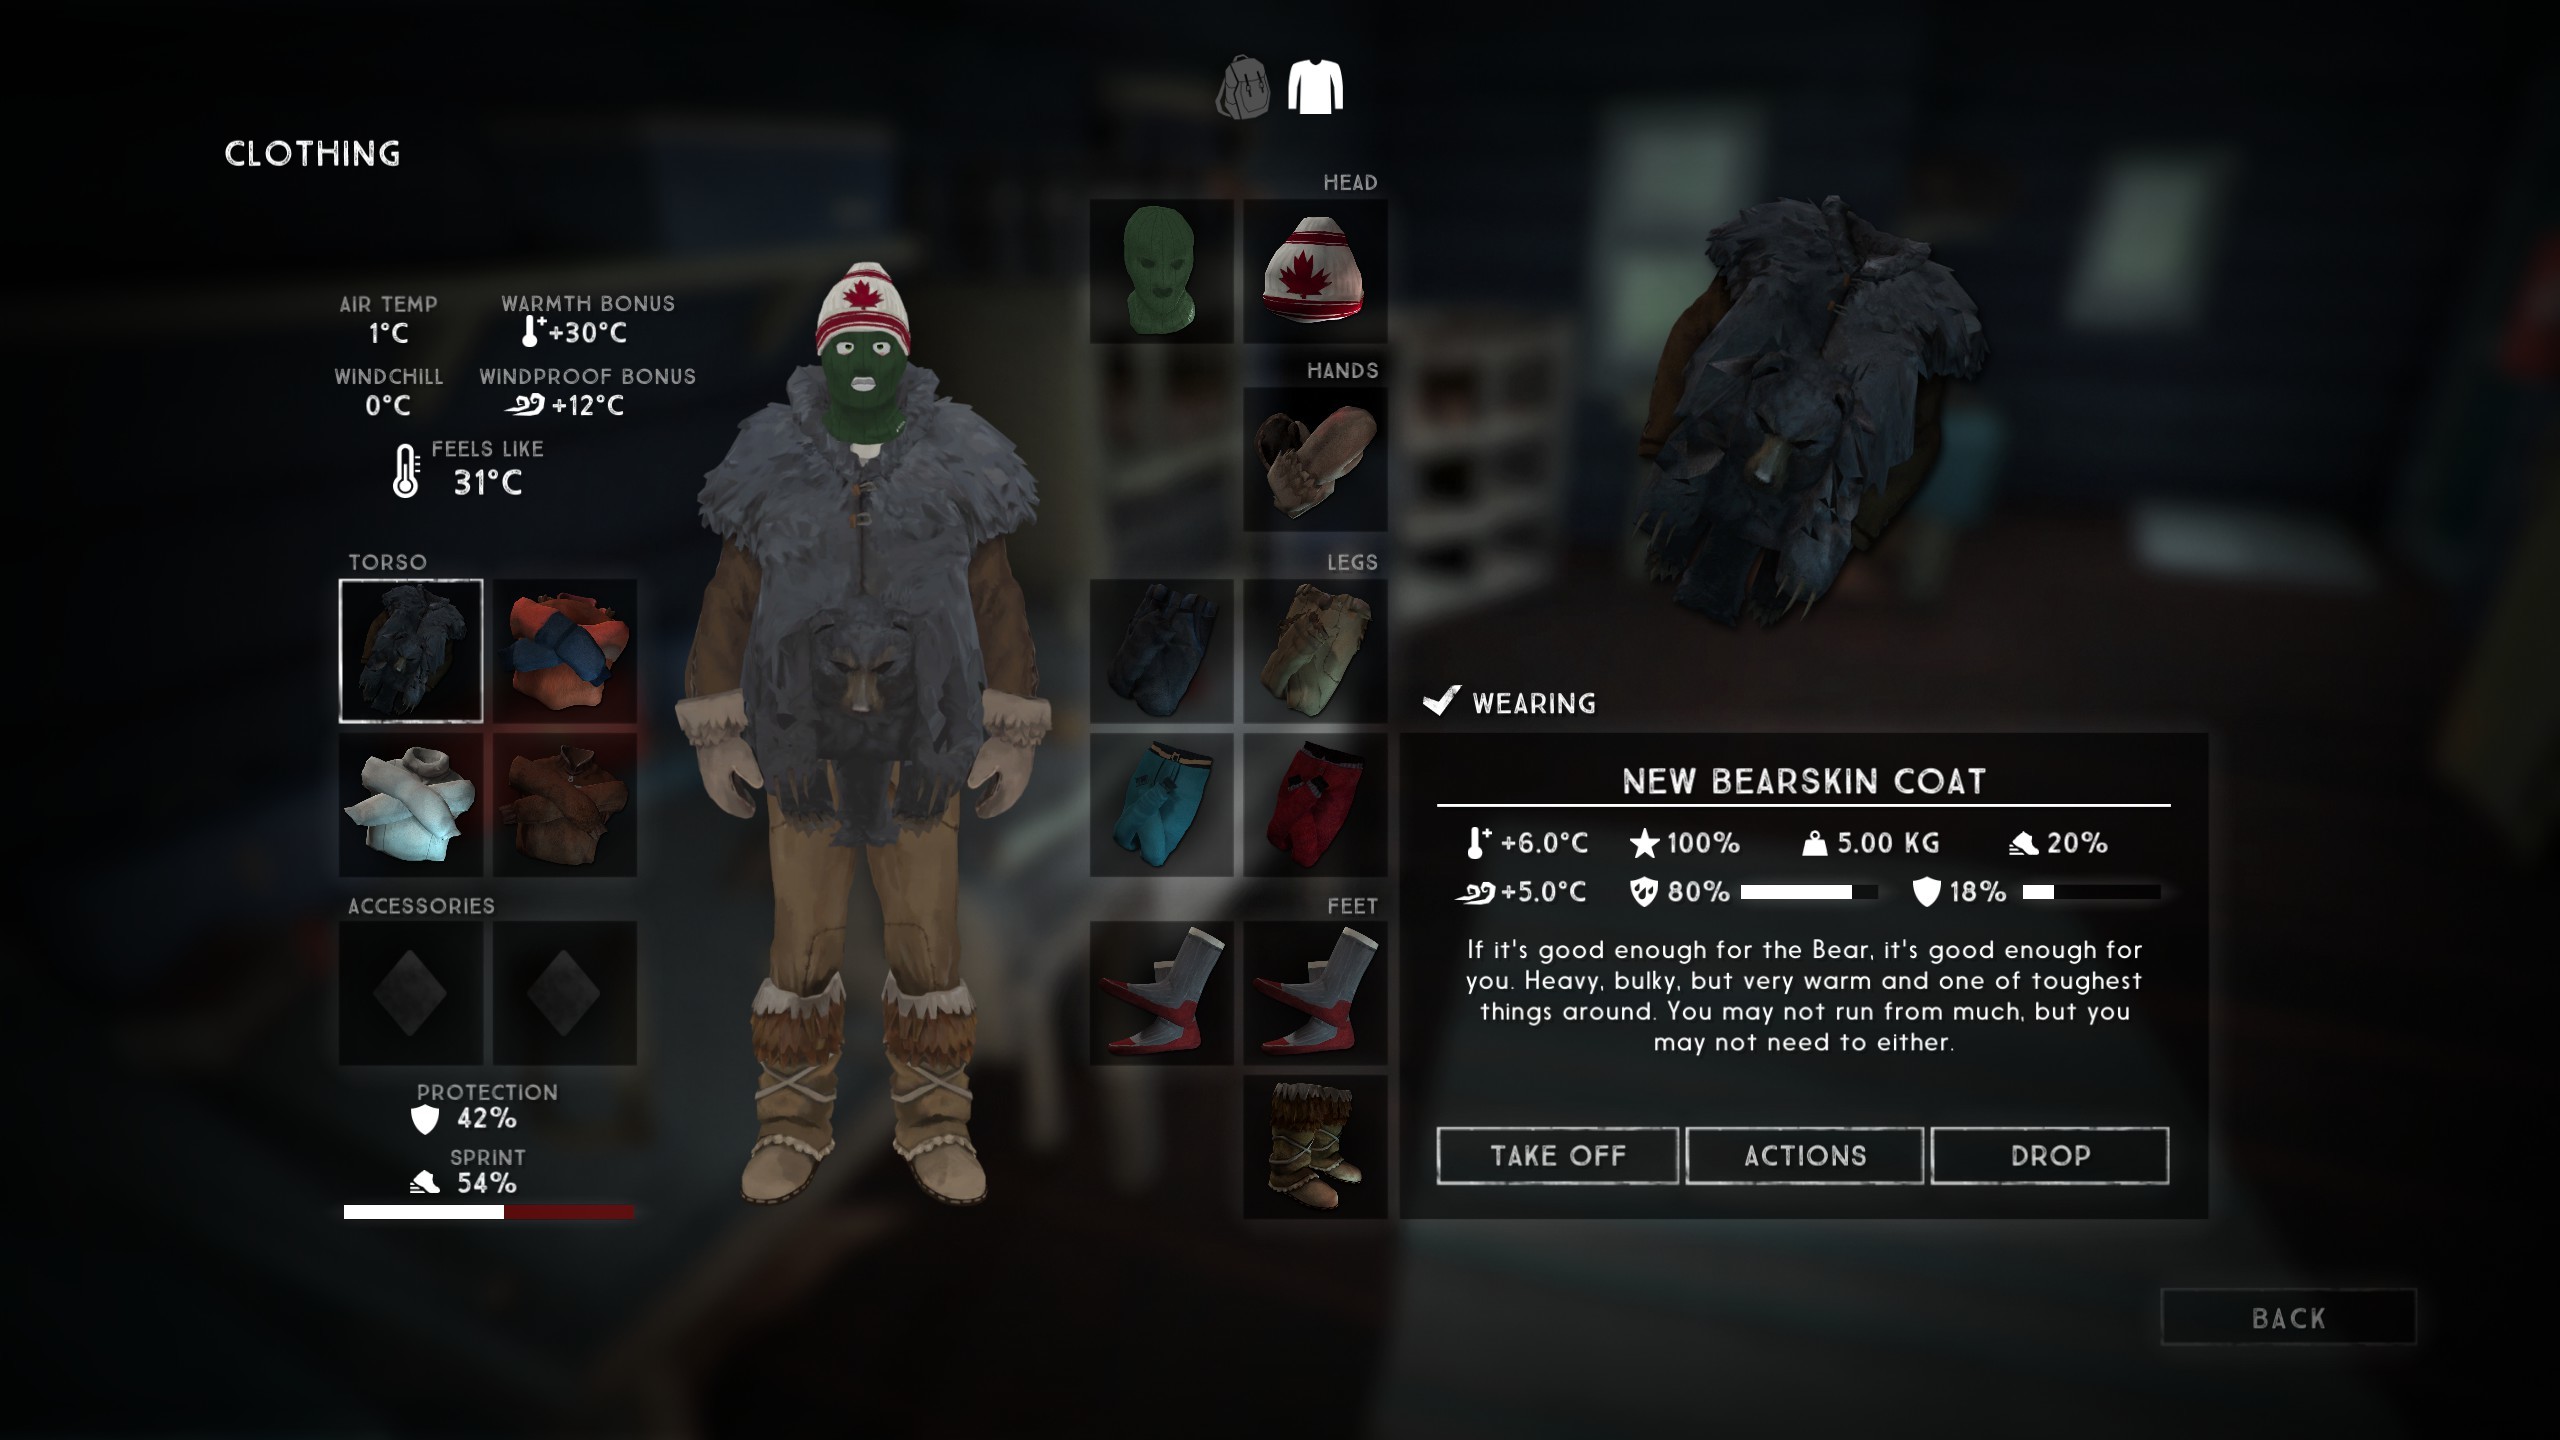 2560x1440 The Bearskin Coat in The Long Dark offers great warmth and protection, but  is heavy